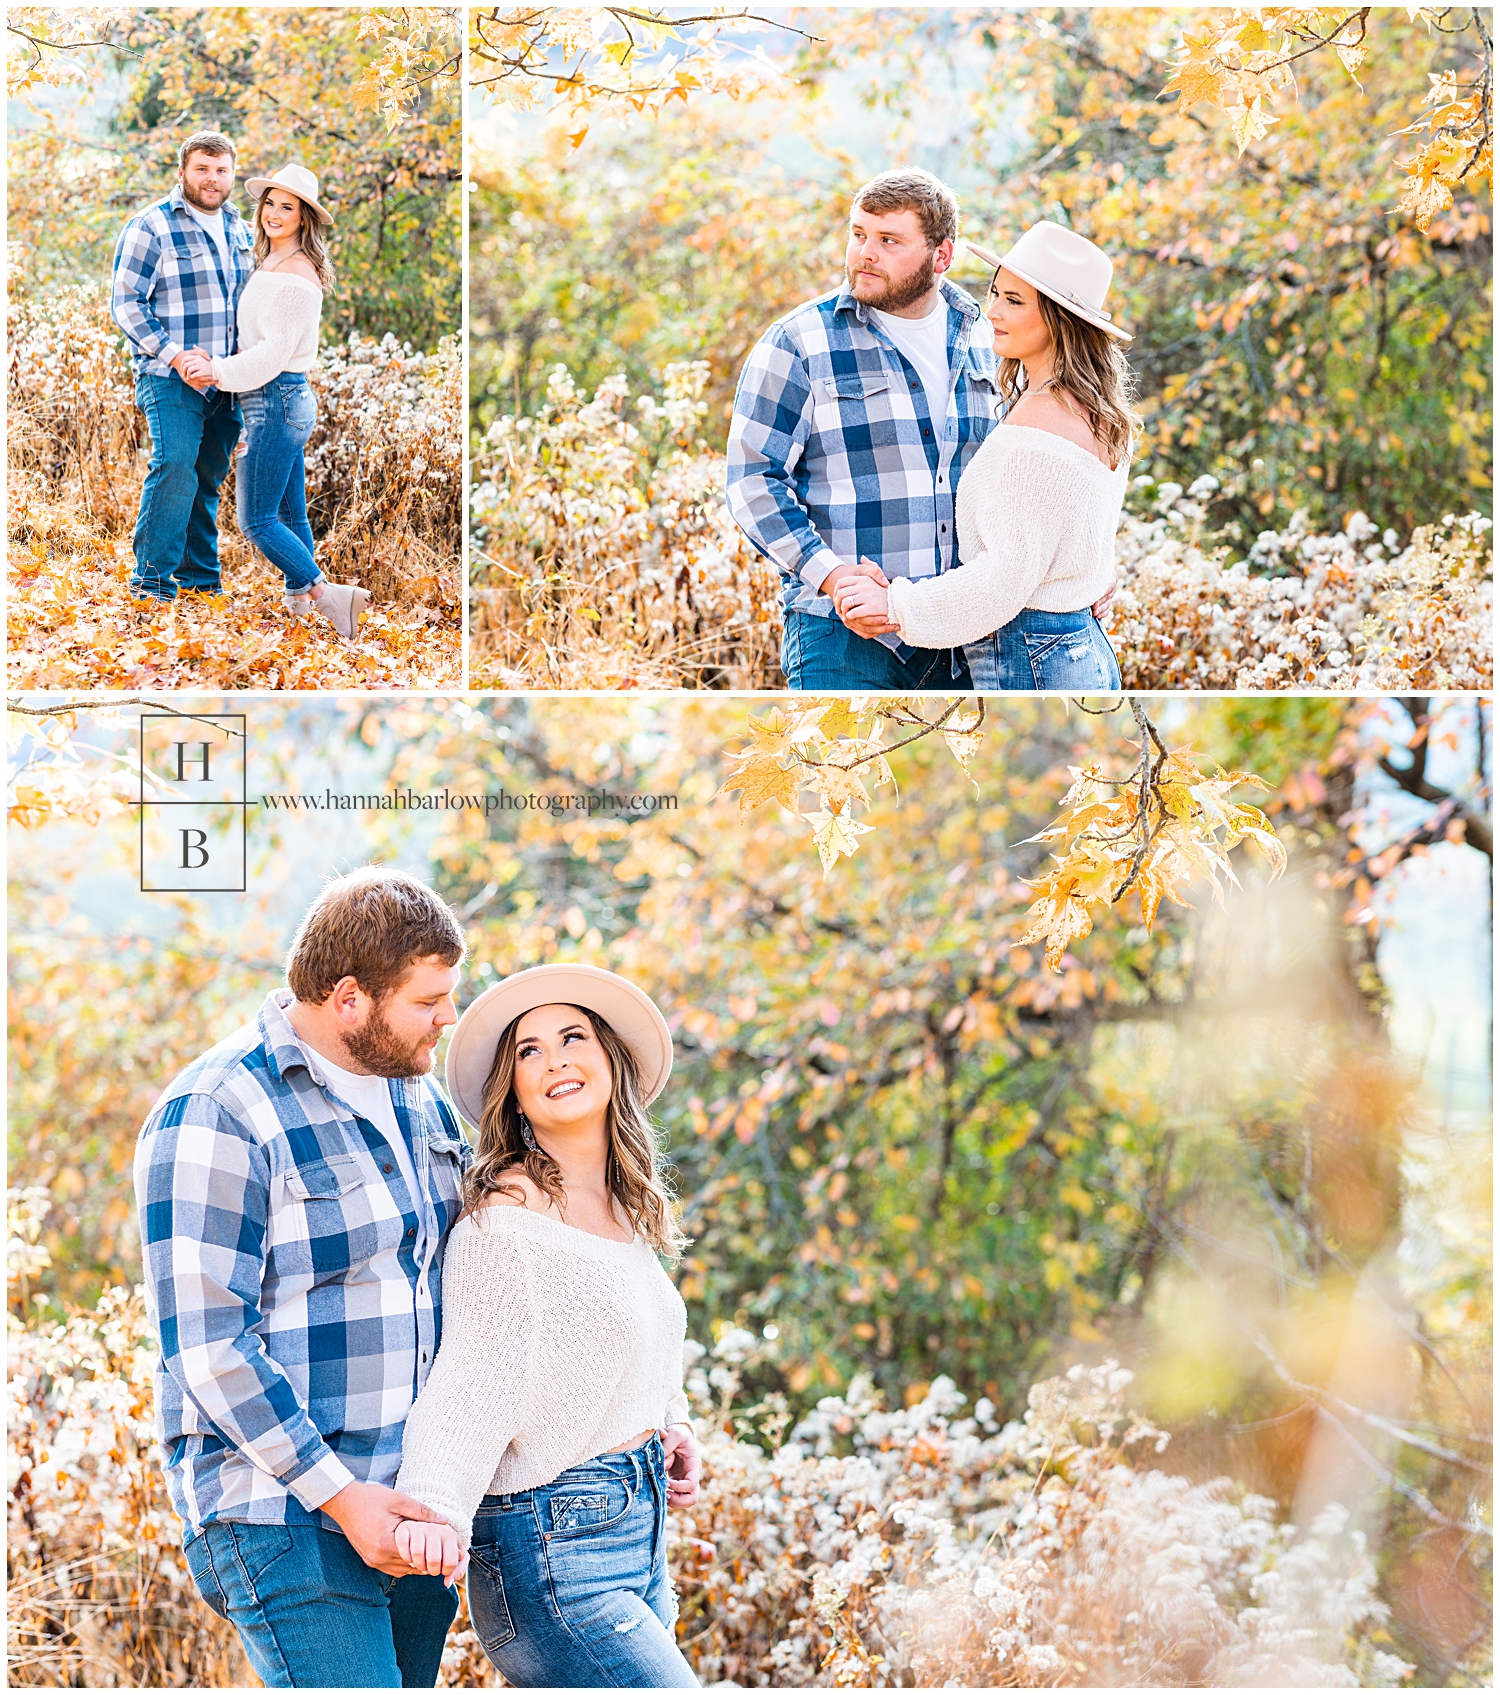 Future wedding couple poses for engagement photos in sunny fall foliage